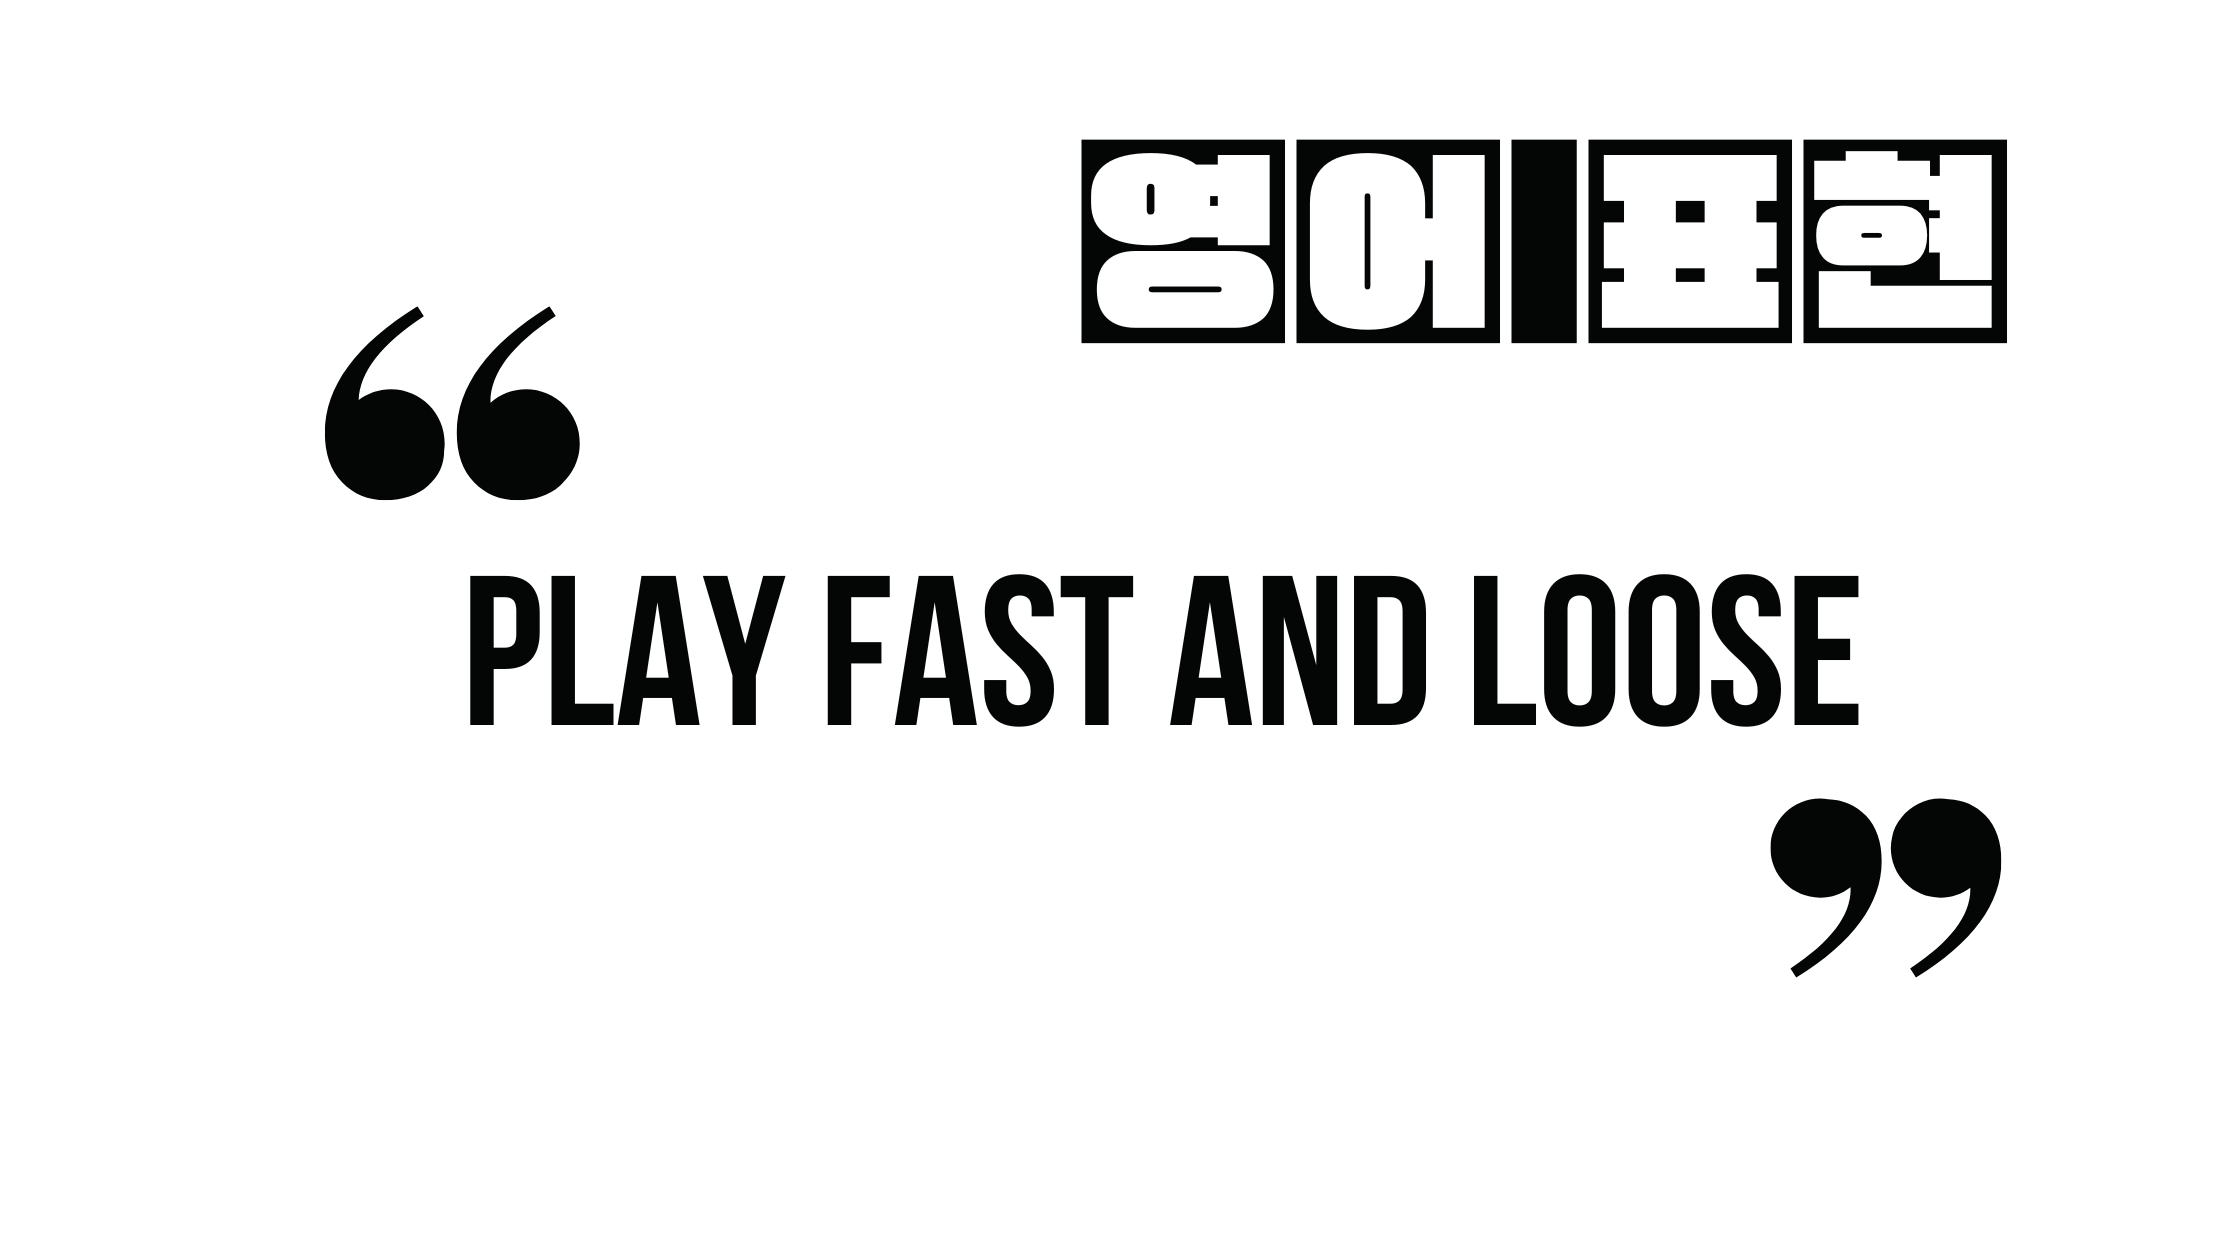 Play fast and loose